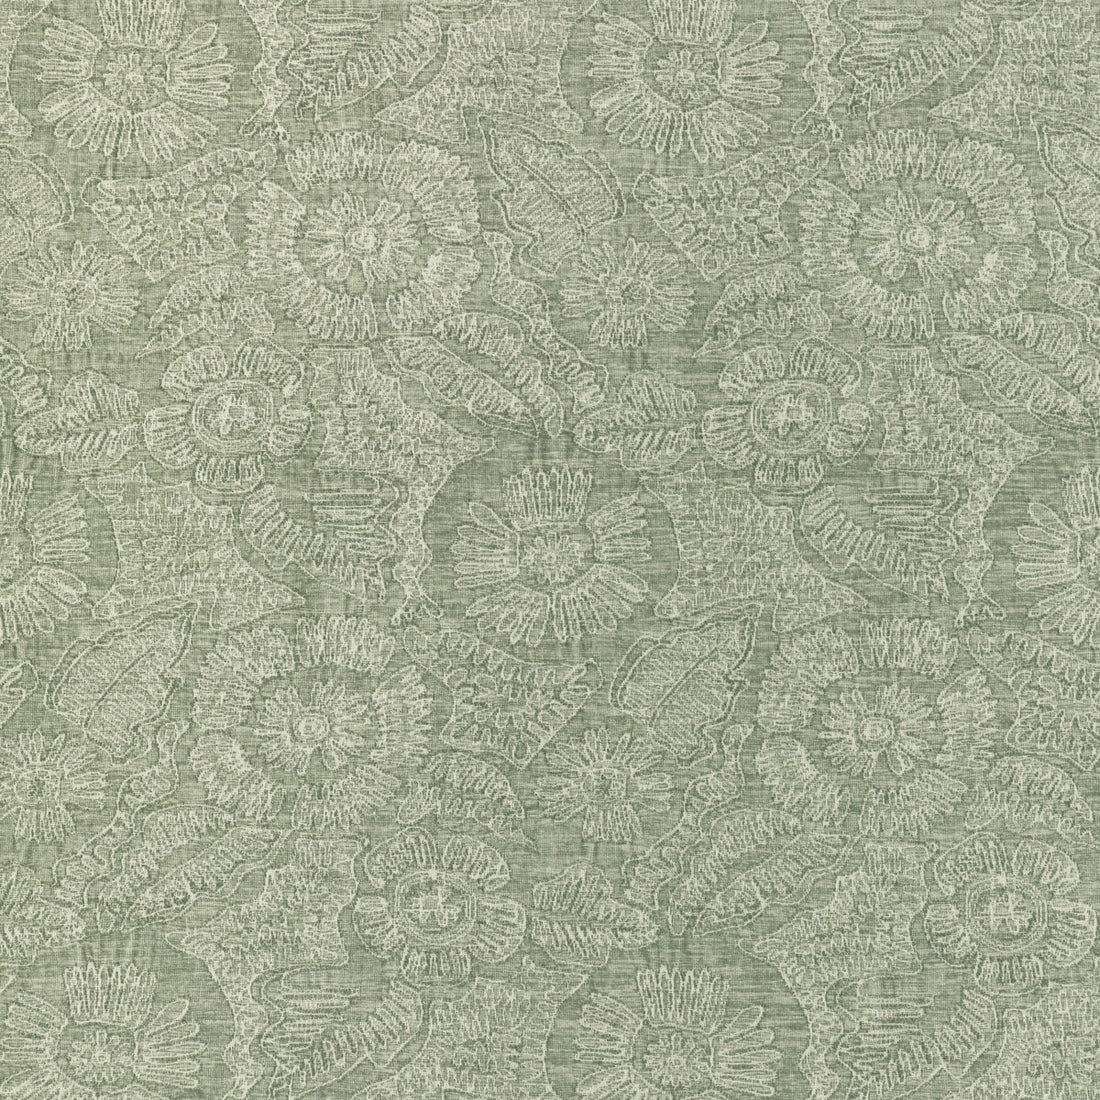 Chenille Bloom fabric in sage color - pattern 36889.130.0 - by Kravet Couture in the Atelier Weaves collection